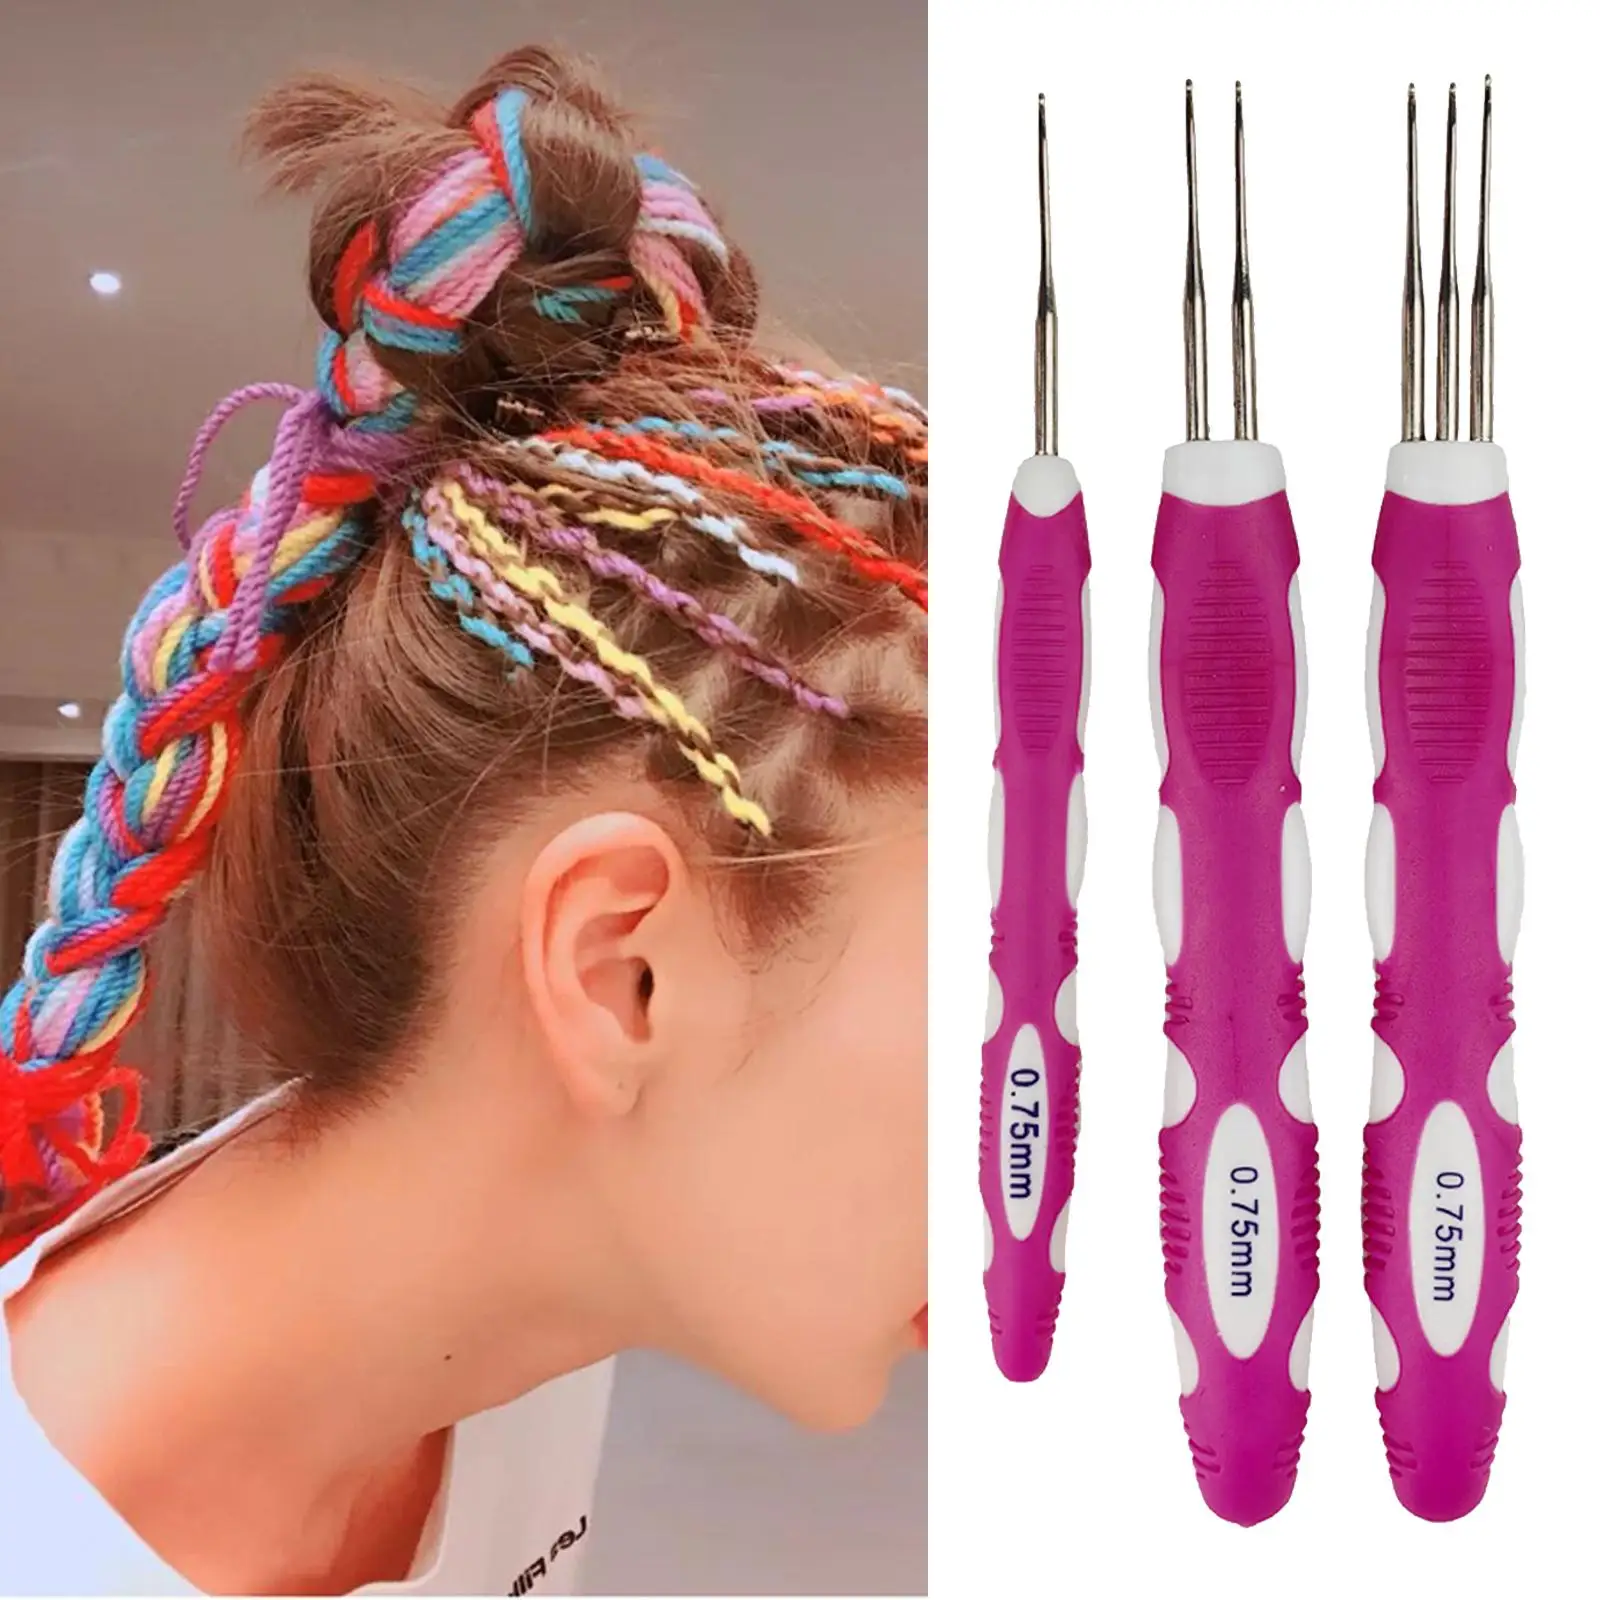 Dreadlock Crochet Needle Durable Easy to Use Professional Hair Braiding 1 Hook 2 Hooks 3 Hooks for Braid Crafts Hair Accessories